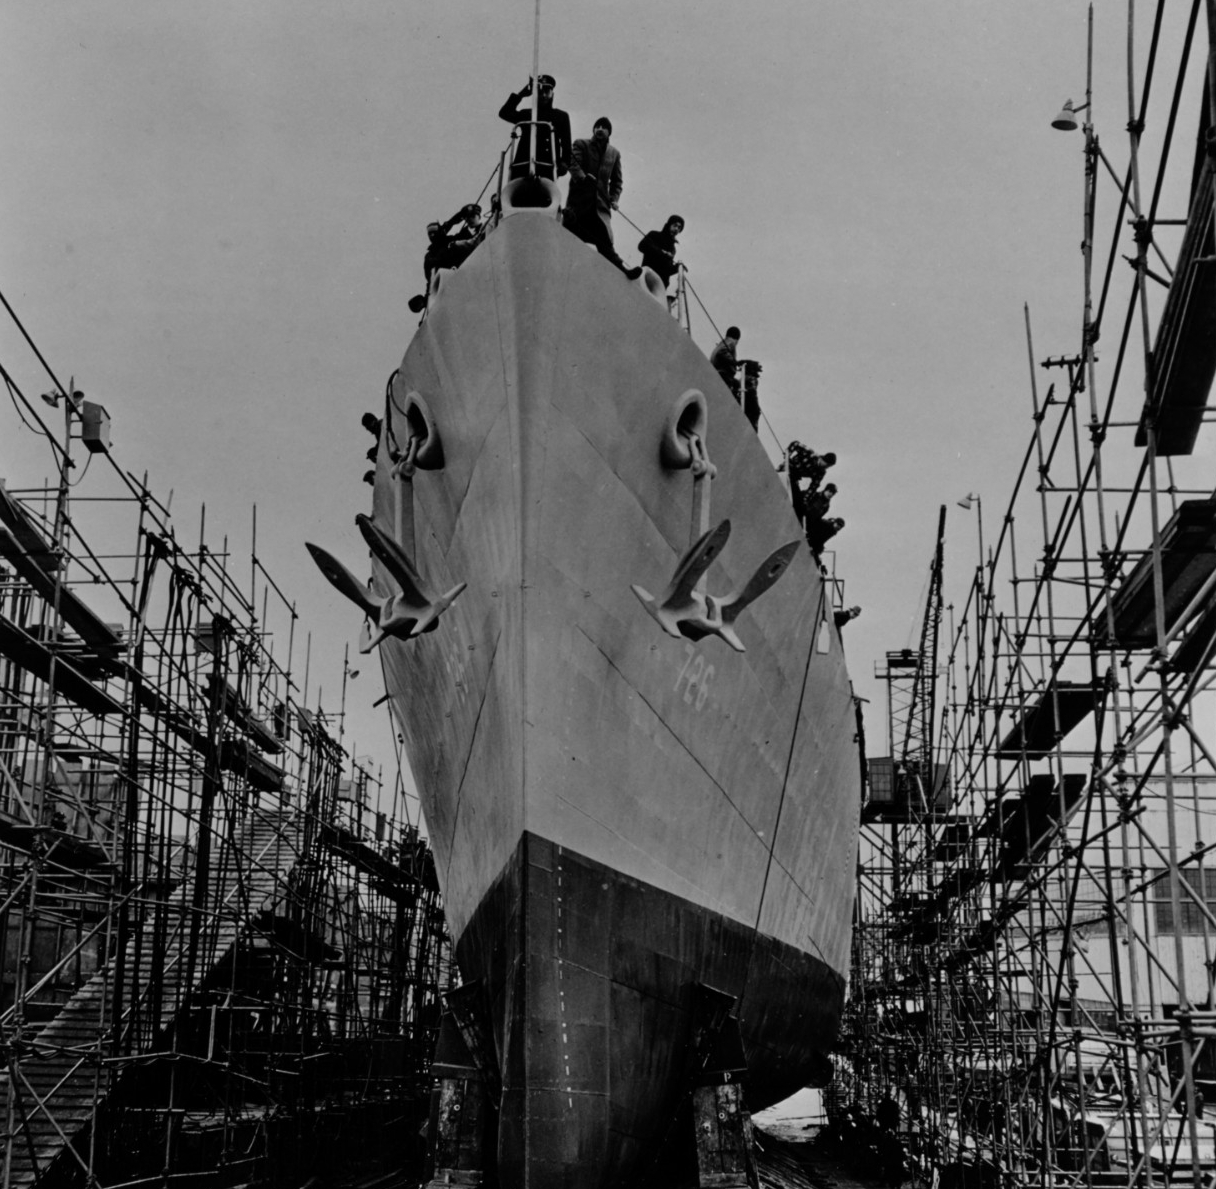 Men ride the ship down the ways, some of them looking on apprehensively, as Meredith is launched at Bath Iron Works, four days before Christmas of 1943. (Naval History and Heritage Command Photograph NH 84817)